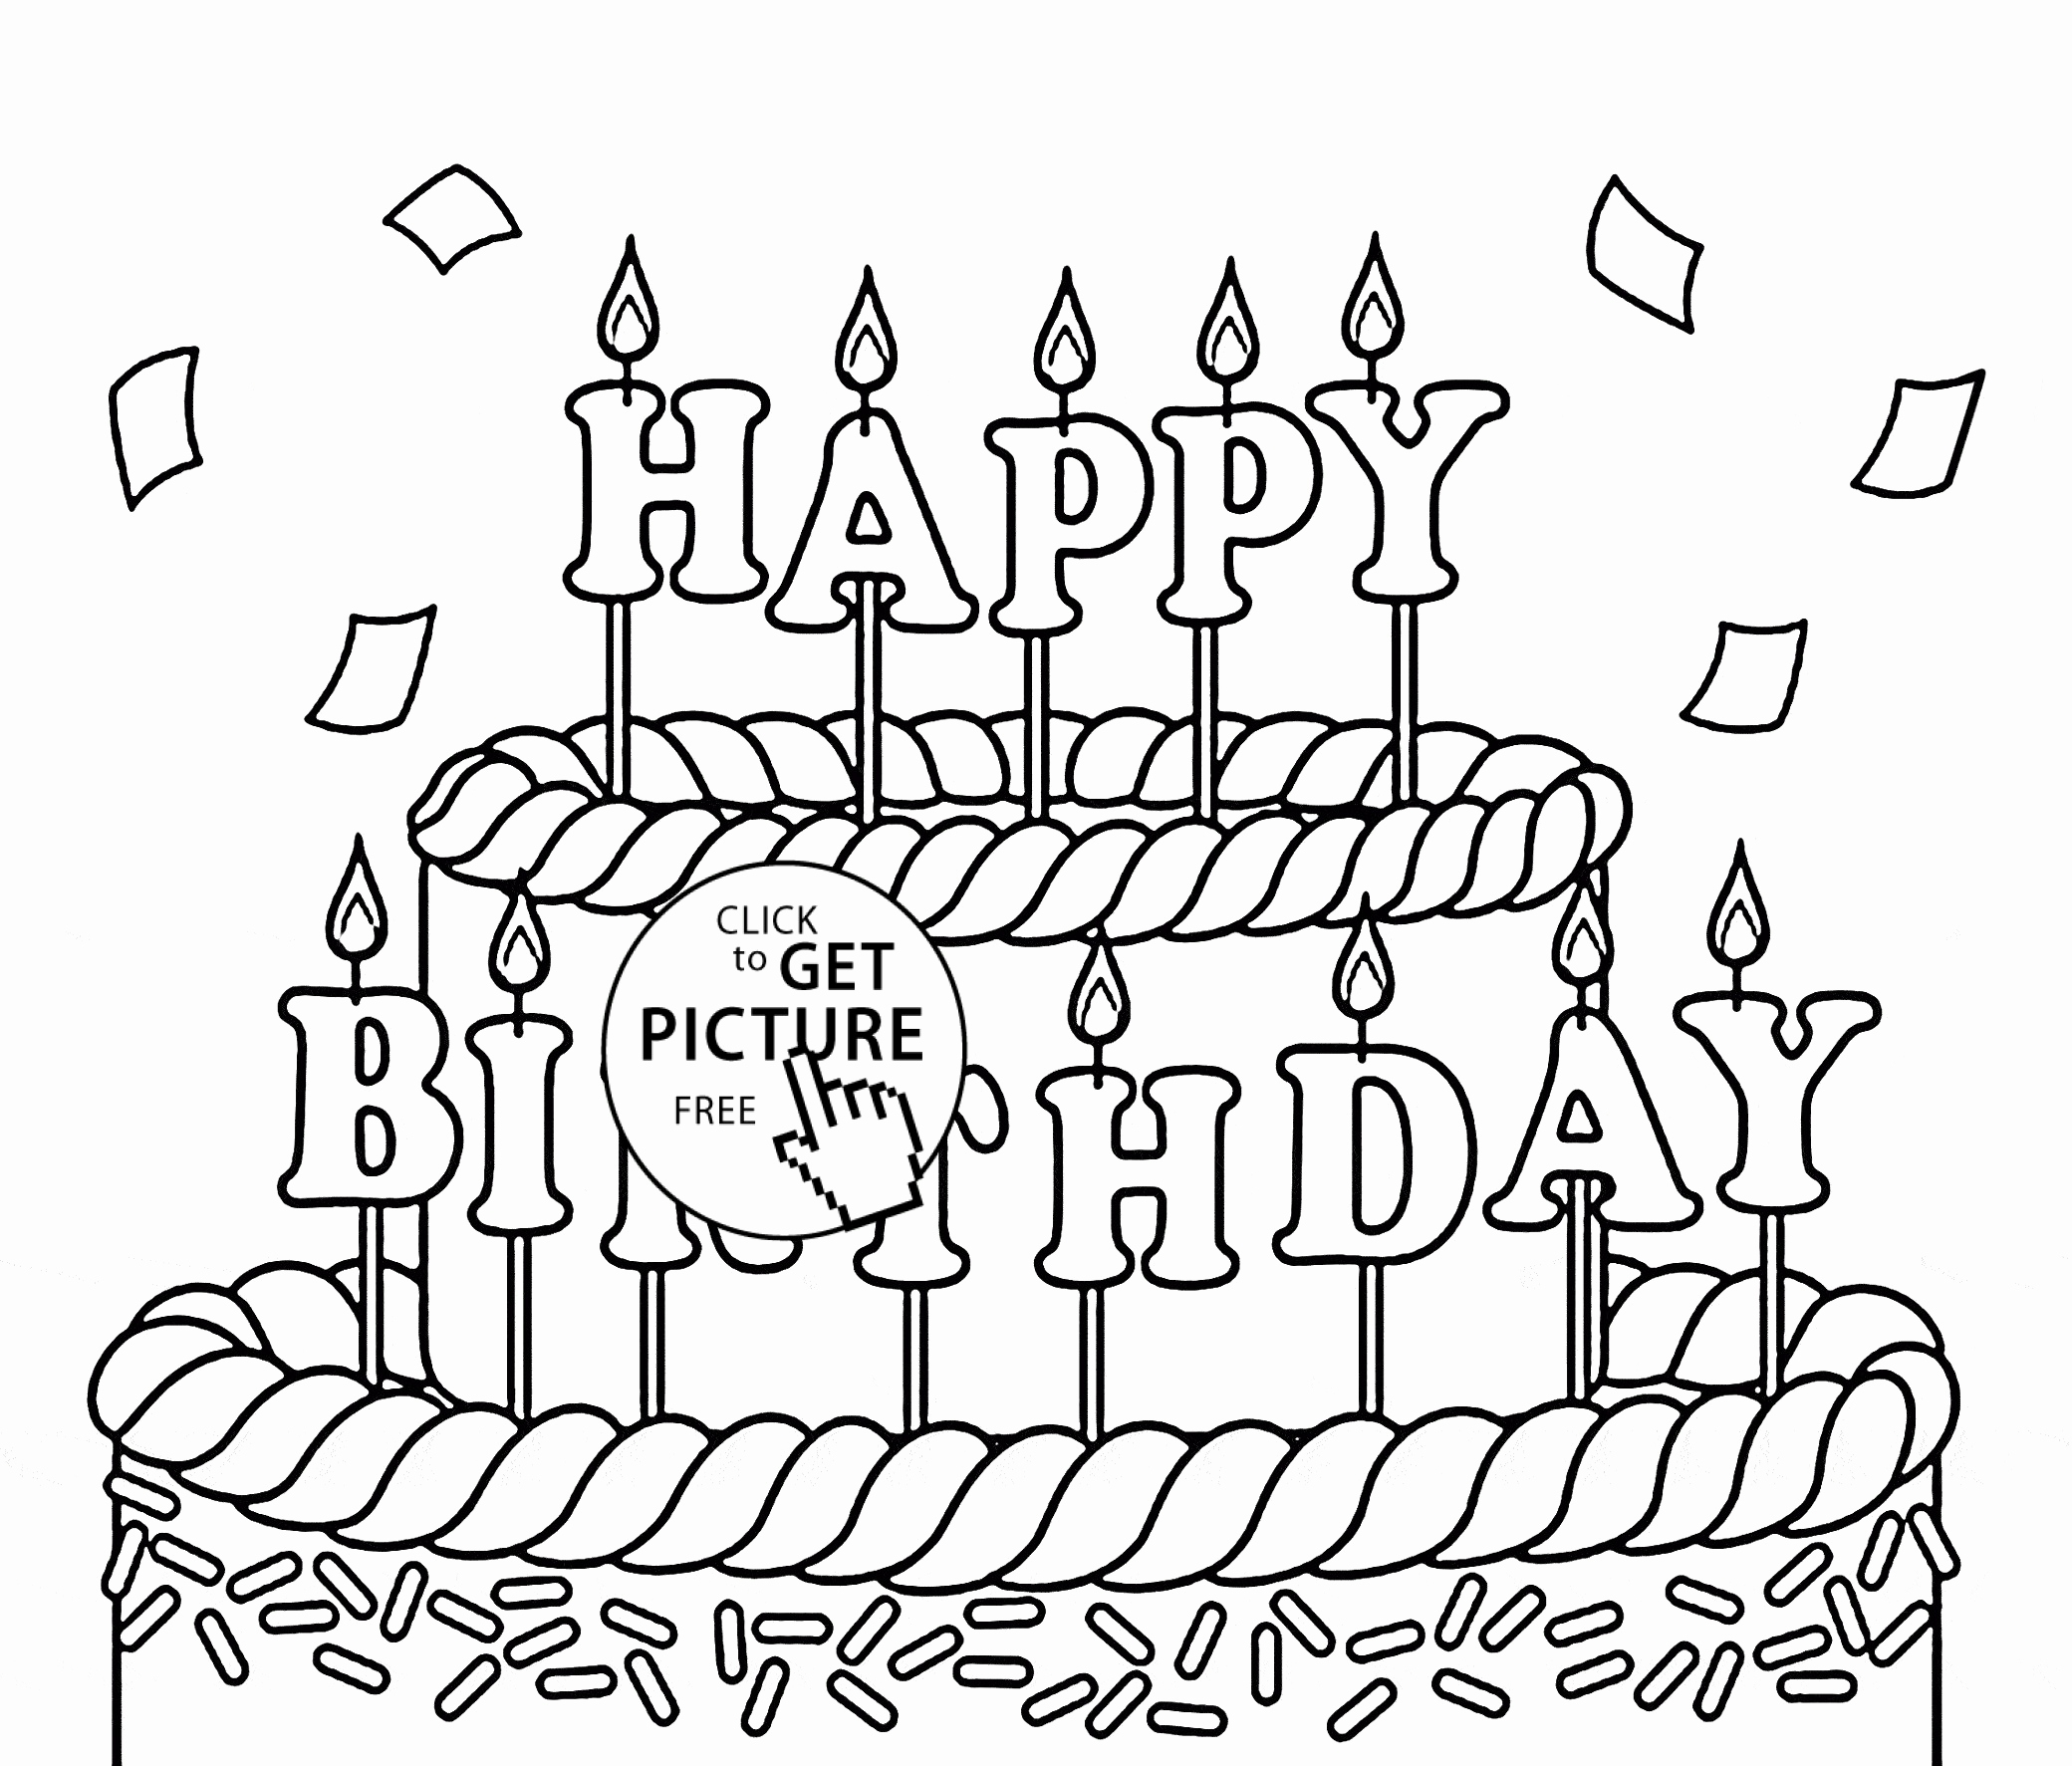 Happy Birthday Coloring Pages To Print at Free